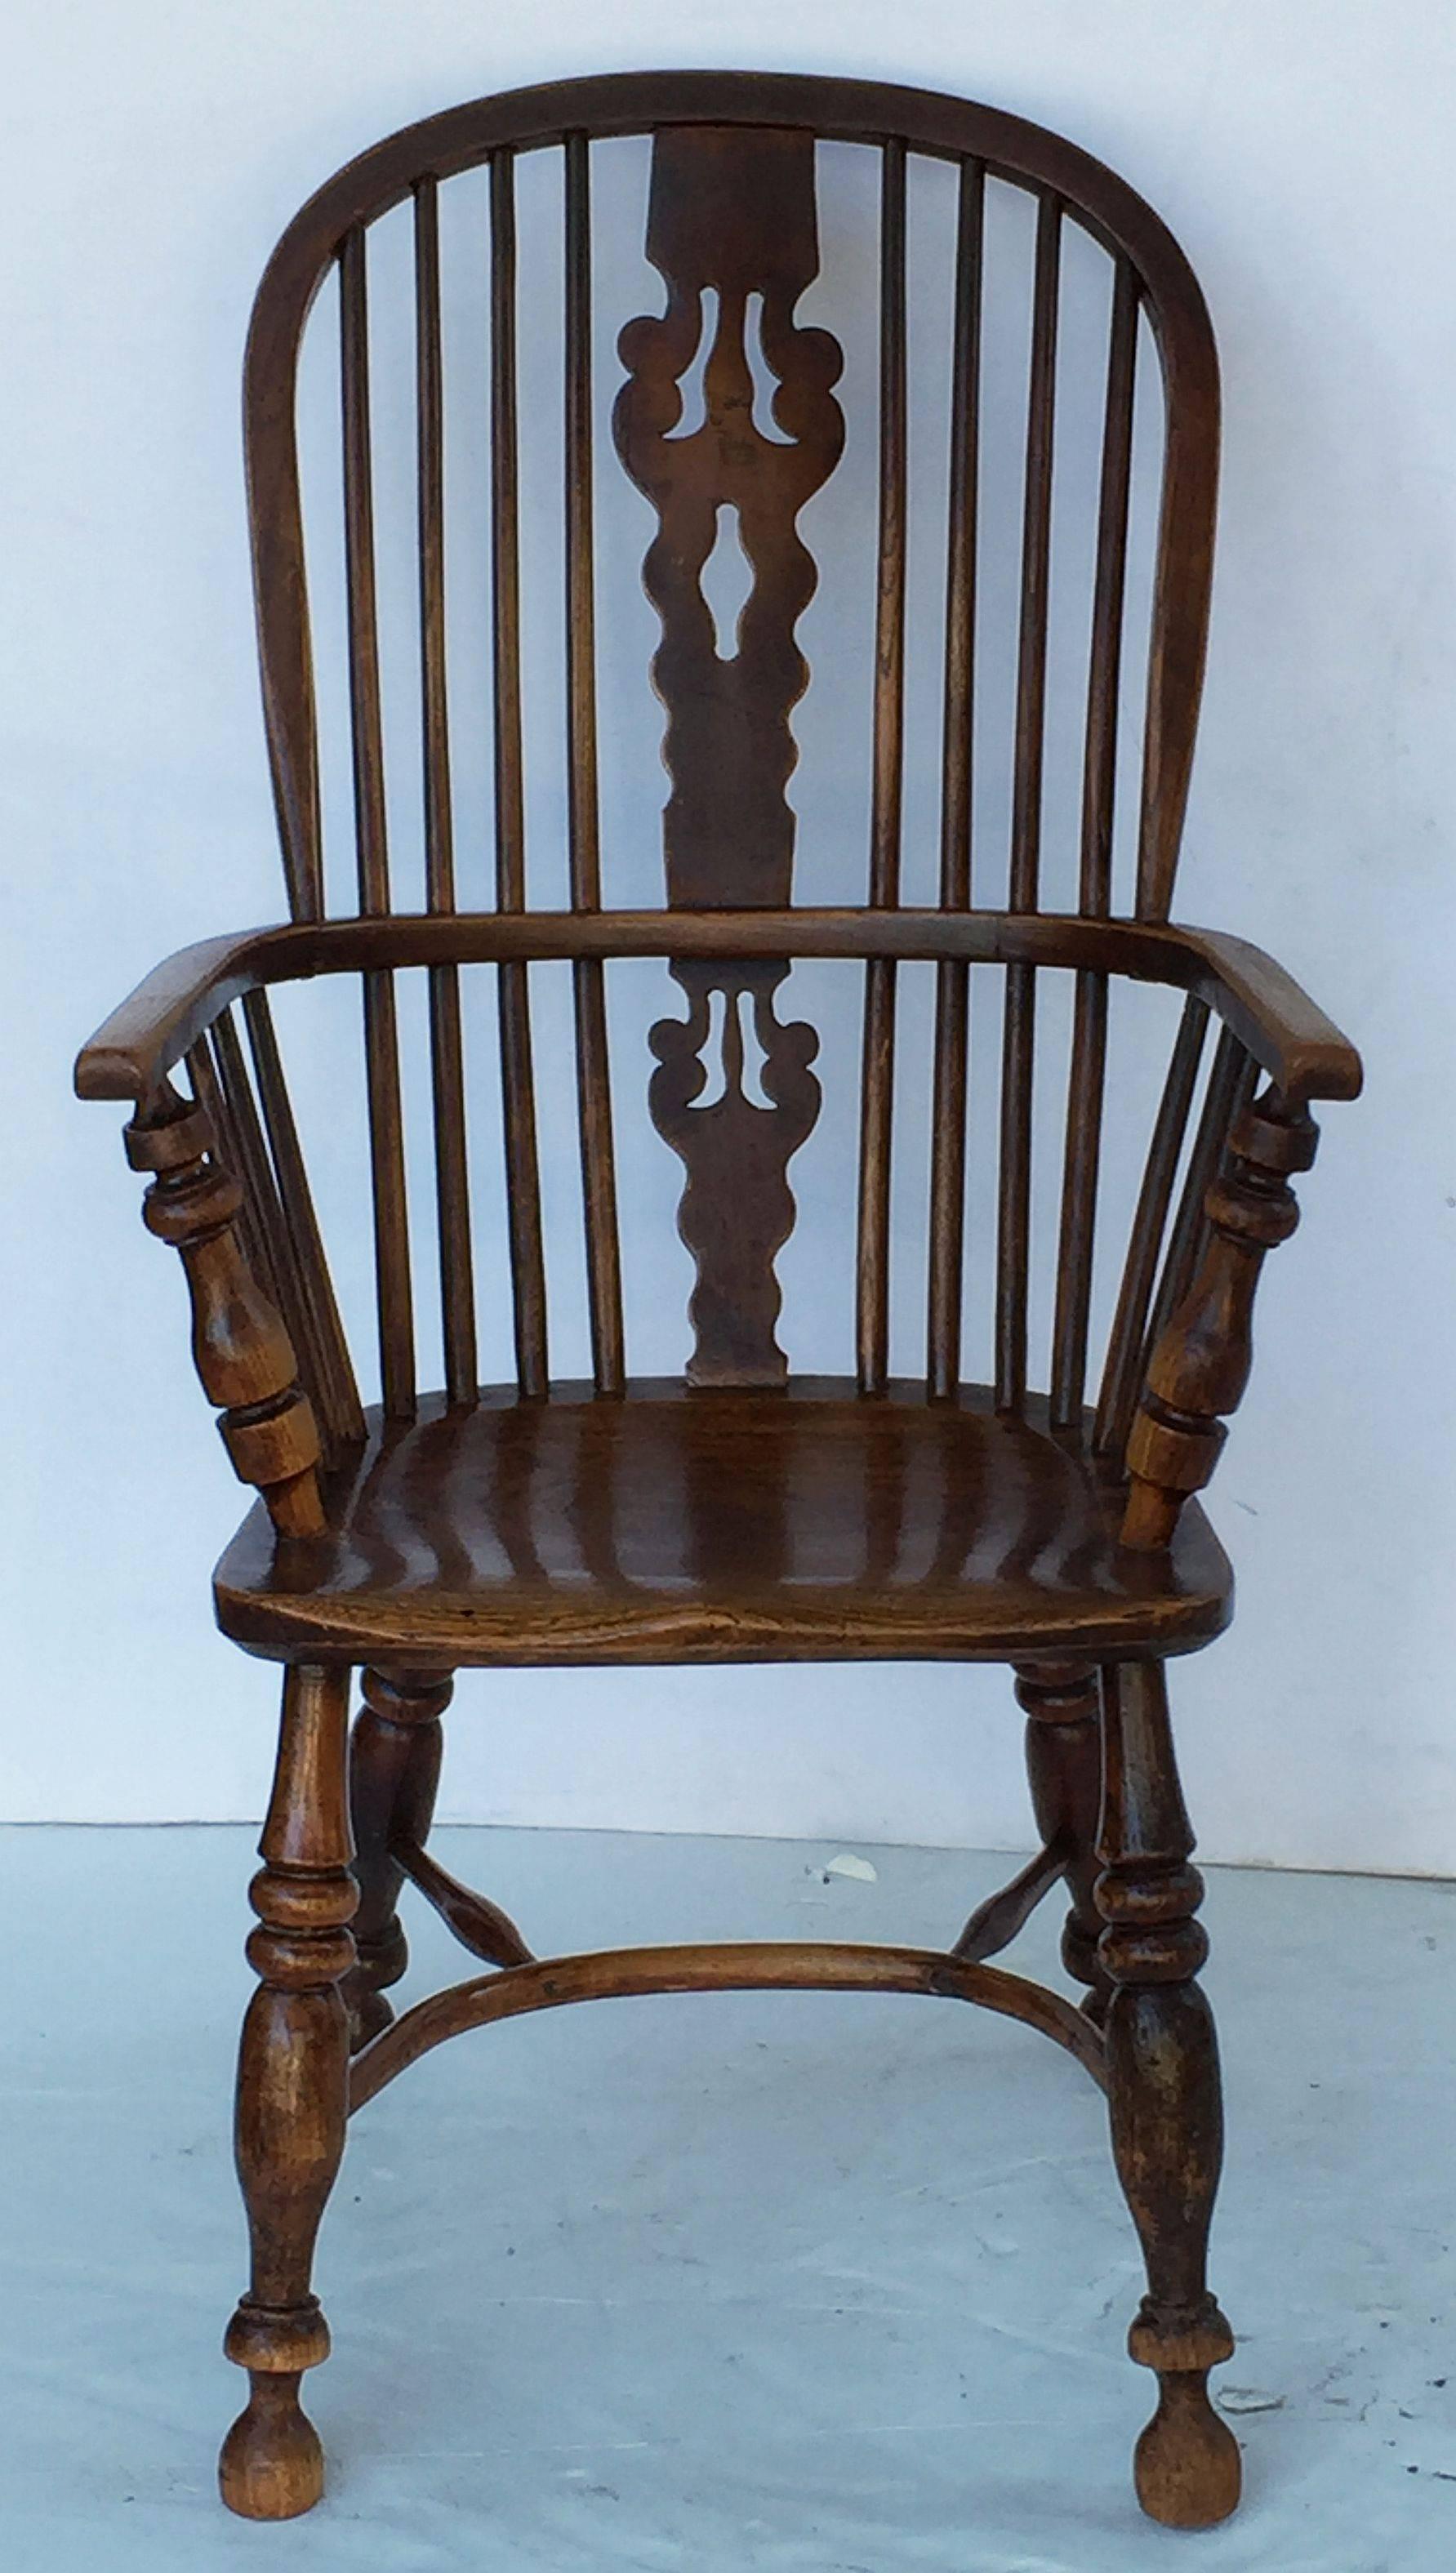 A handsome large English Windsor high back chair of elm and ashwoods, featuring a bowed top rail and pierced splat and spindle back, with solid seat on turned crinoline stretcher. With a scroll-work design to the split.